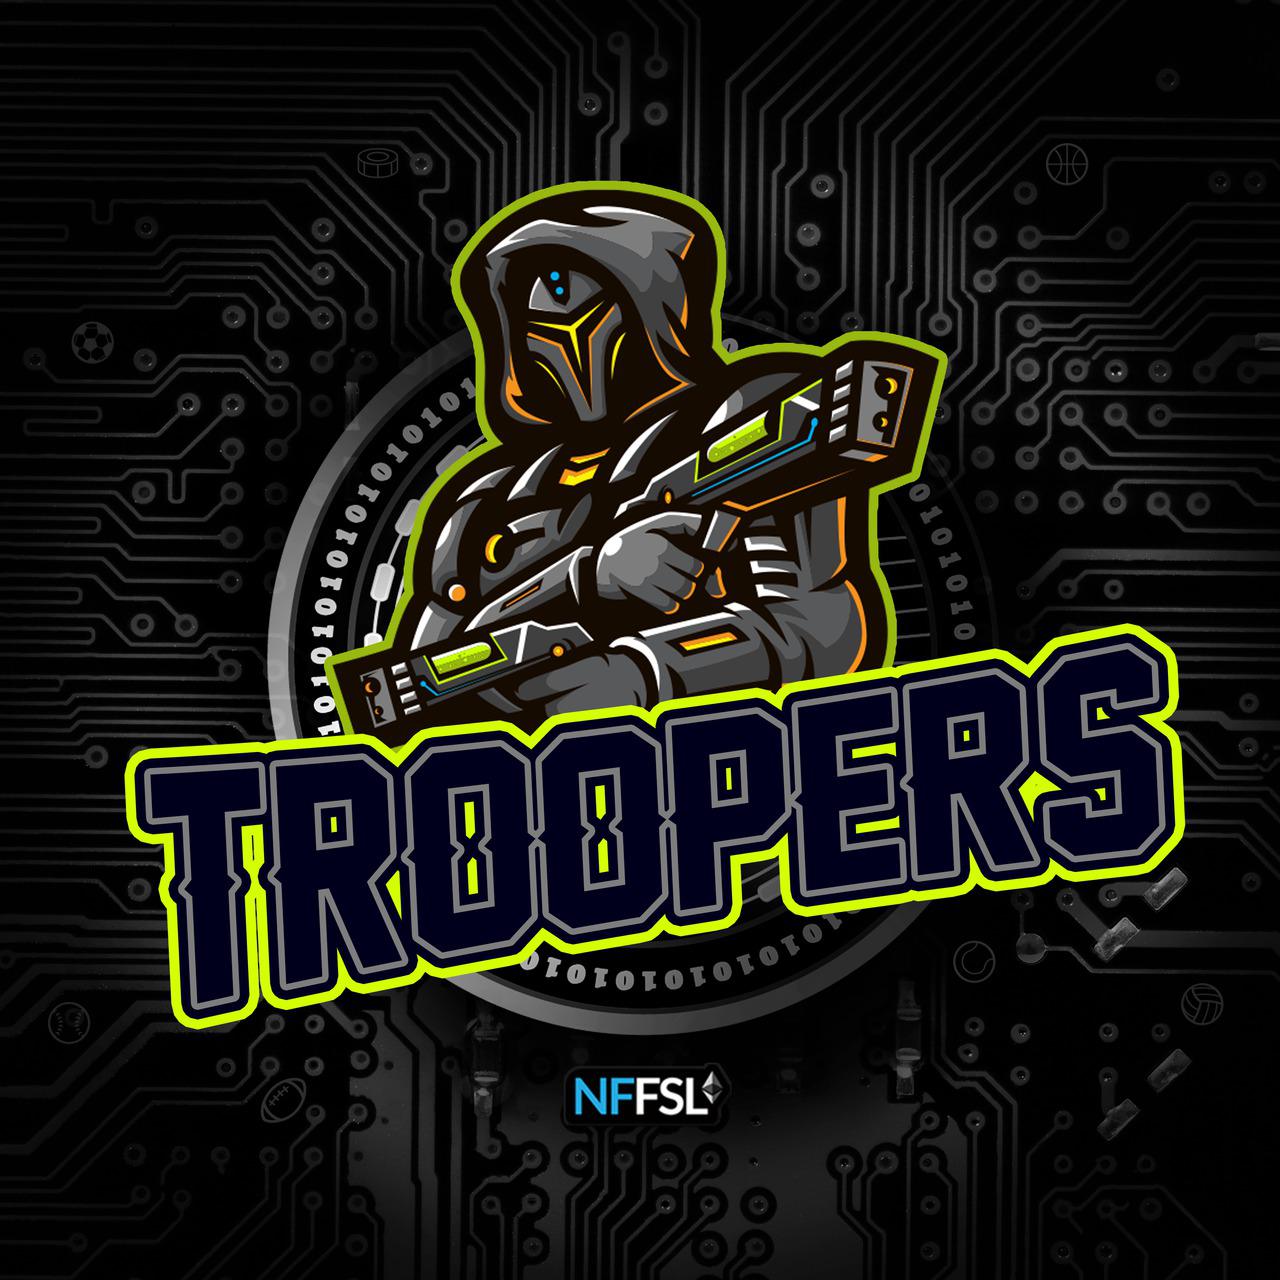 Troopers_NFFSL